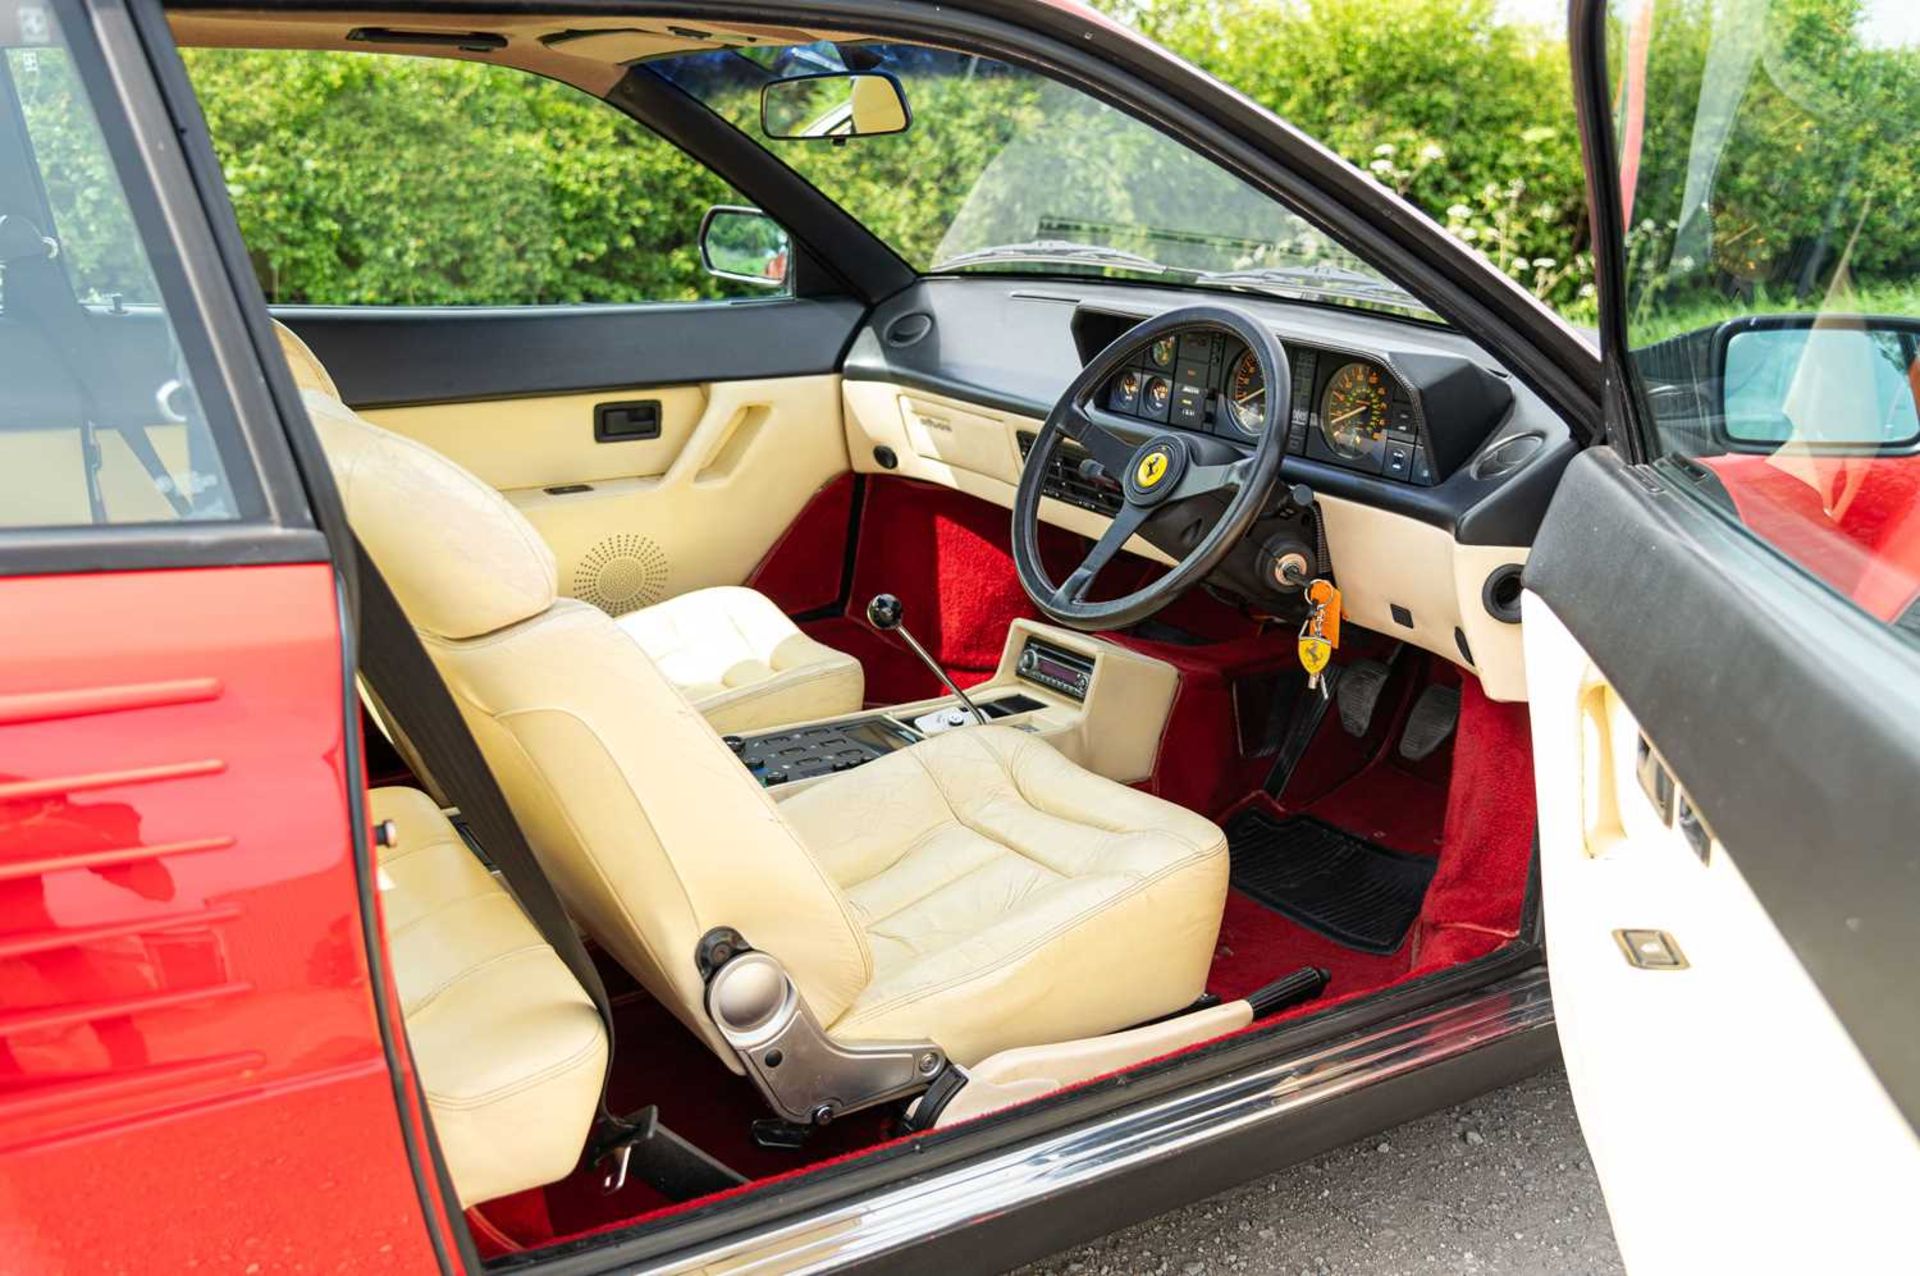 1988 Ferrari Mondial QV ***NO RESERVE*** Remained in the same ownership for nearly two decades finis - Image 43 of 91